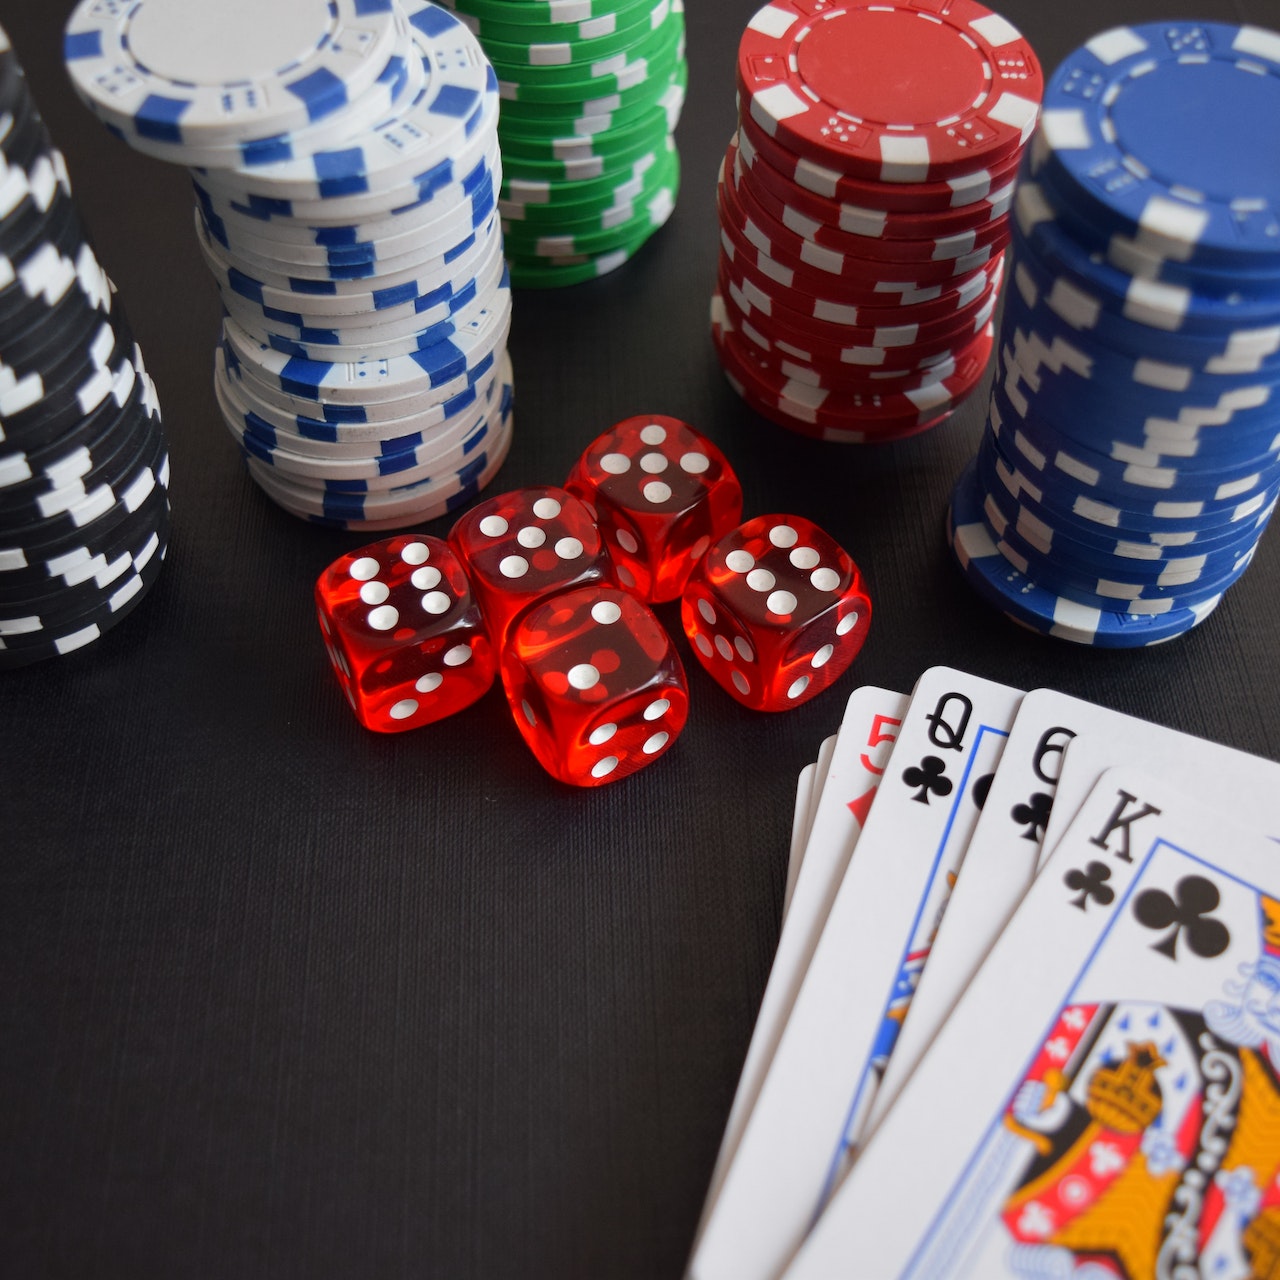 Reasons why Malta is home to many online casinos